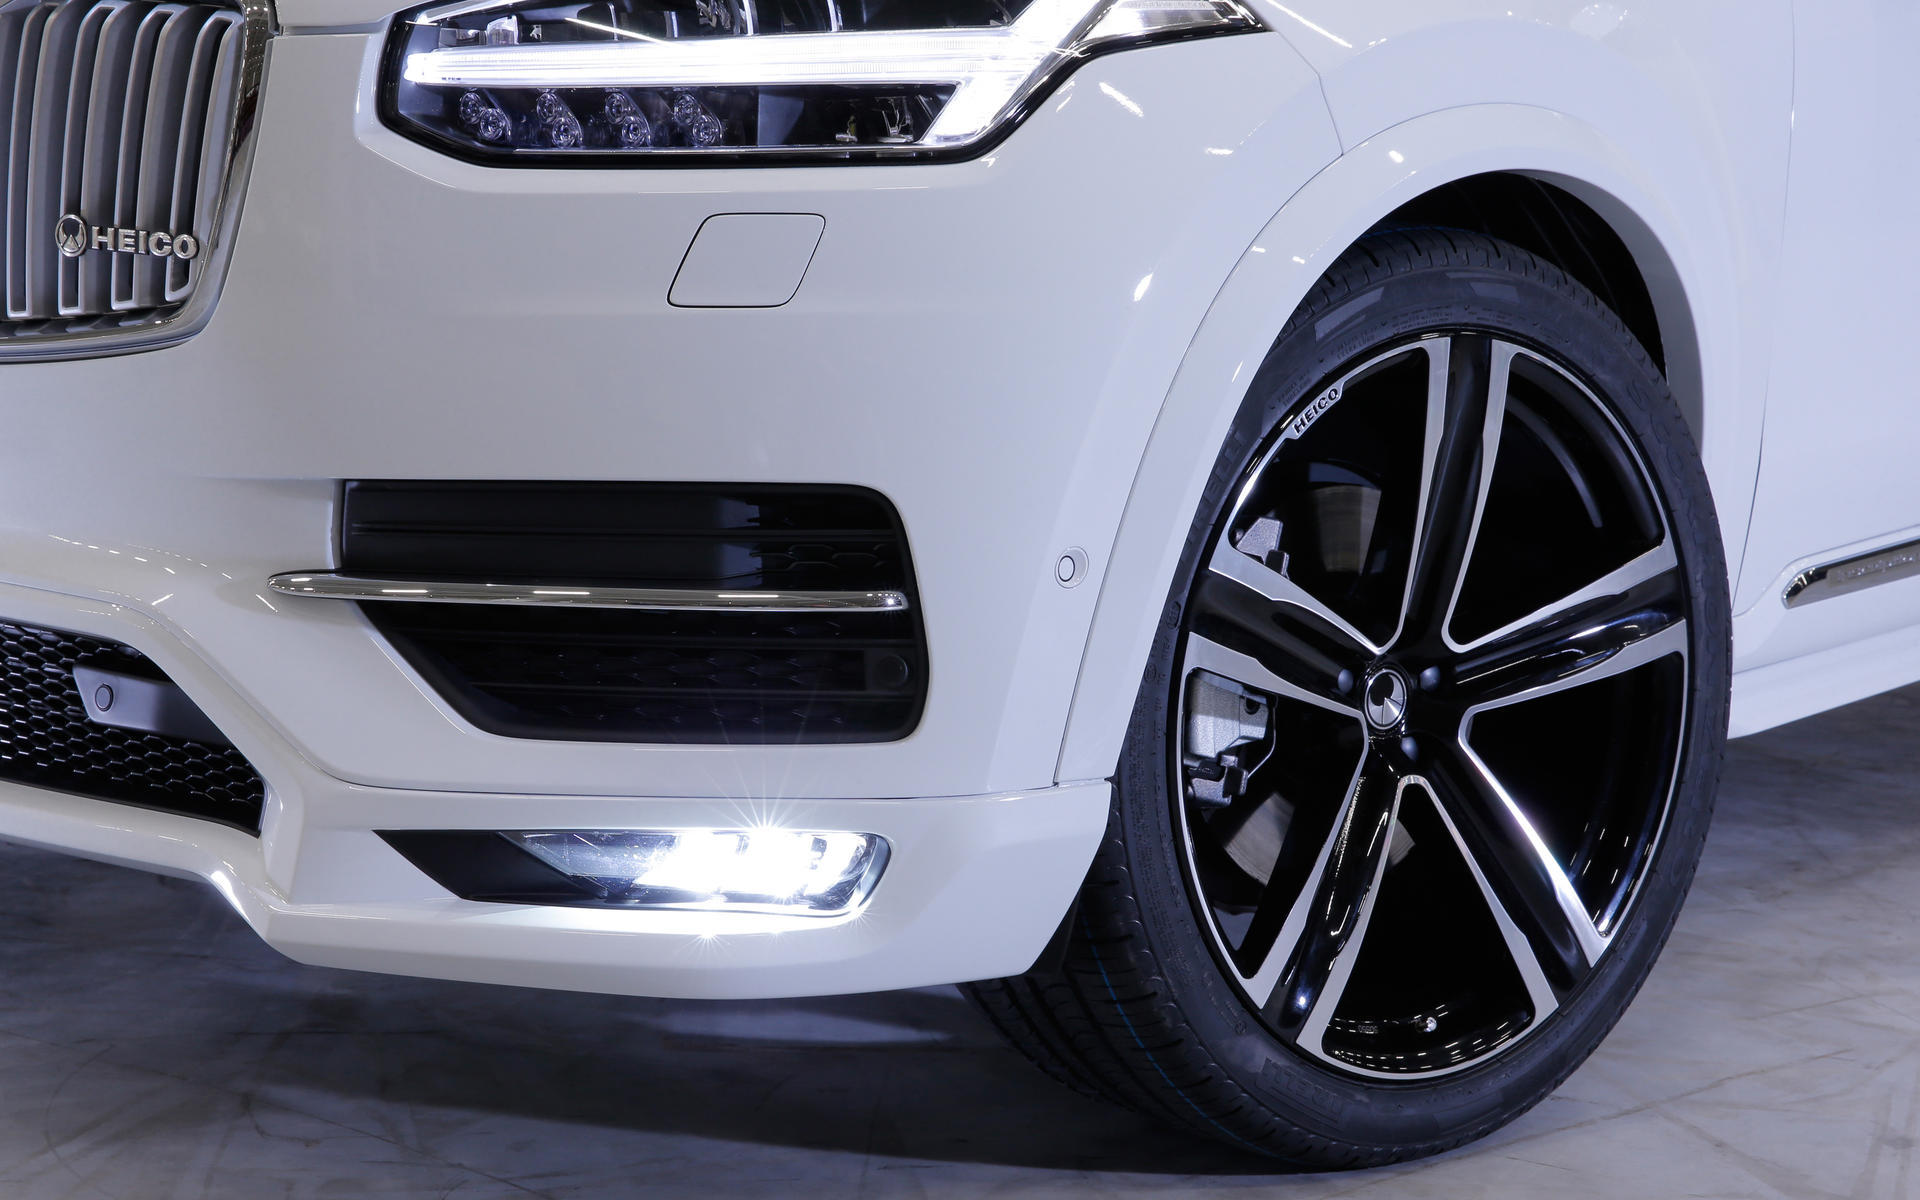 Check our price and buy Heico Sportiv Body Kit for Volvo XC90